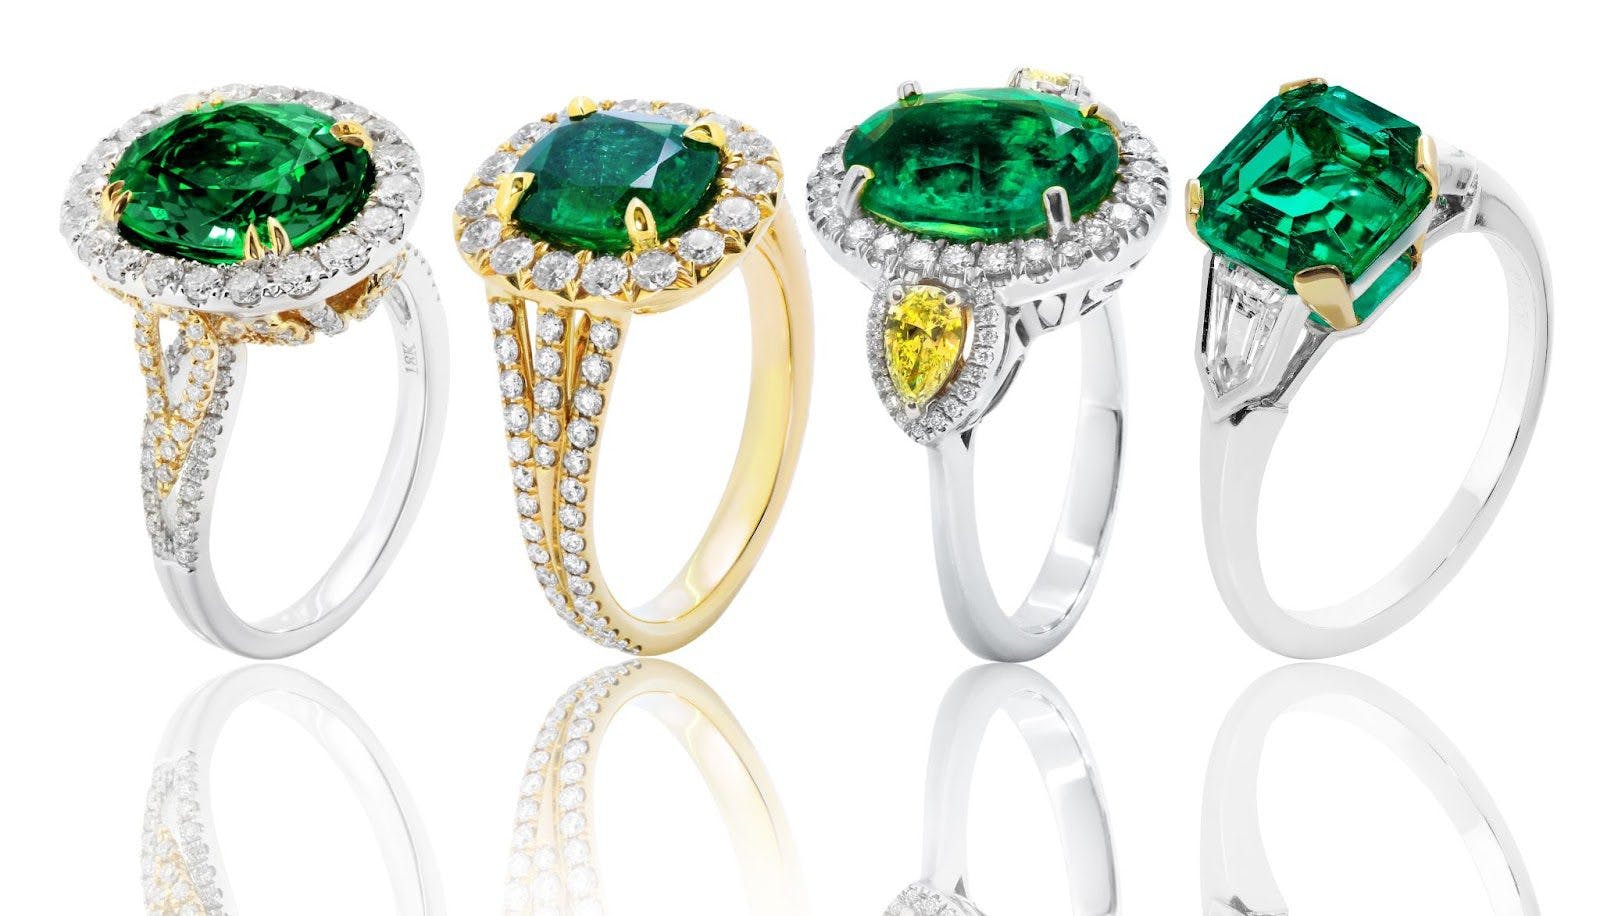 Emerald Jewelry Leads Spring 2022 Trends As Celebrity Engagements Leave Consumers Green with Envy